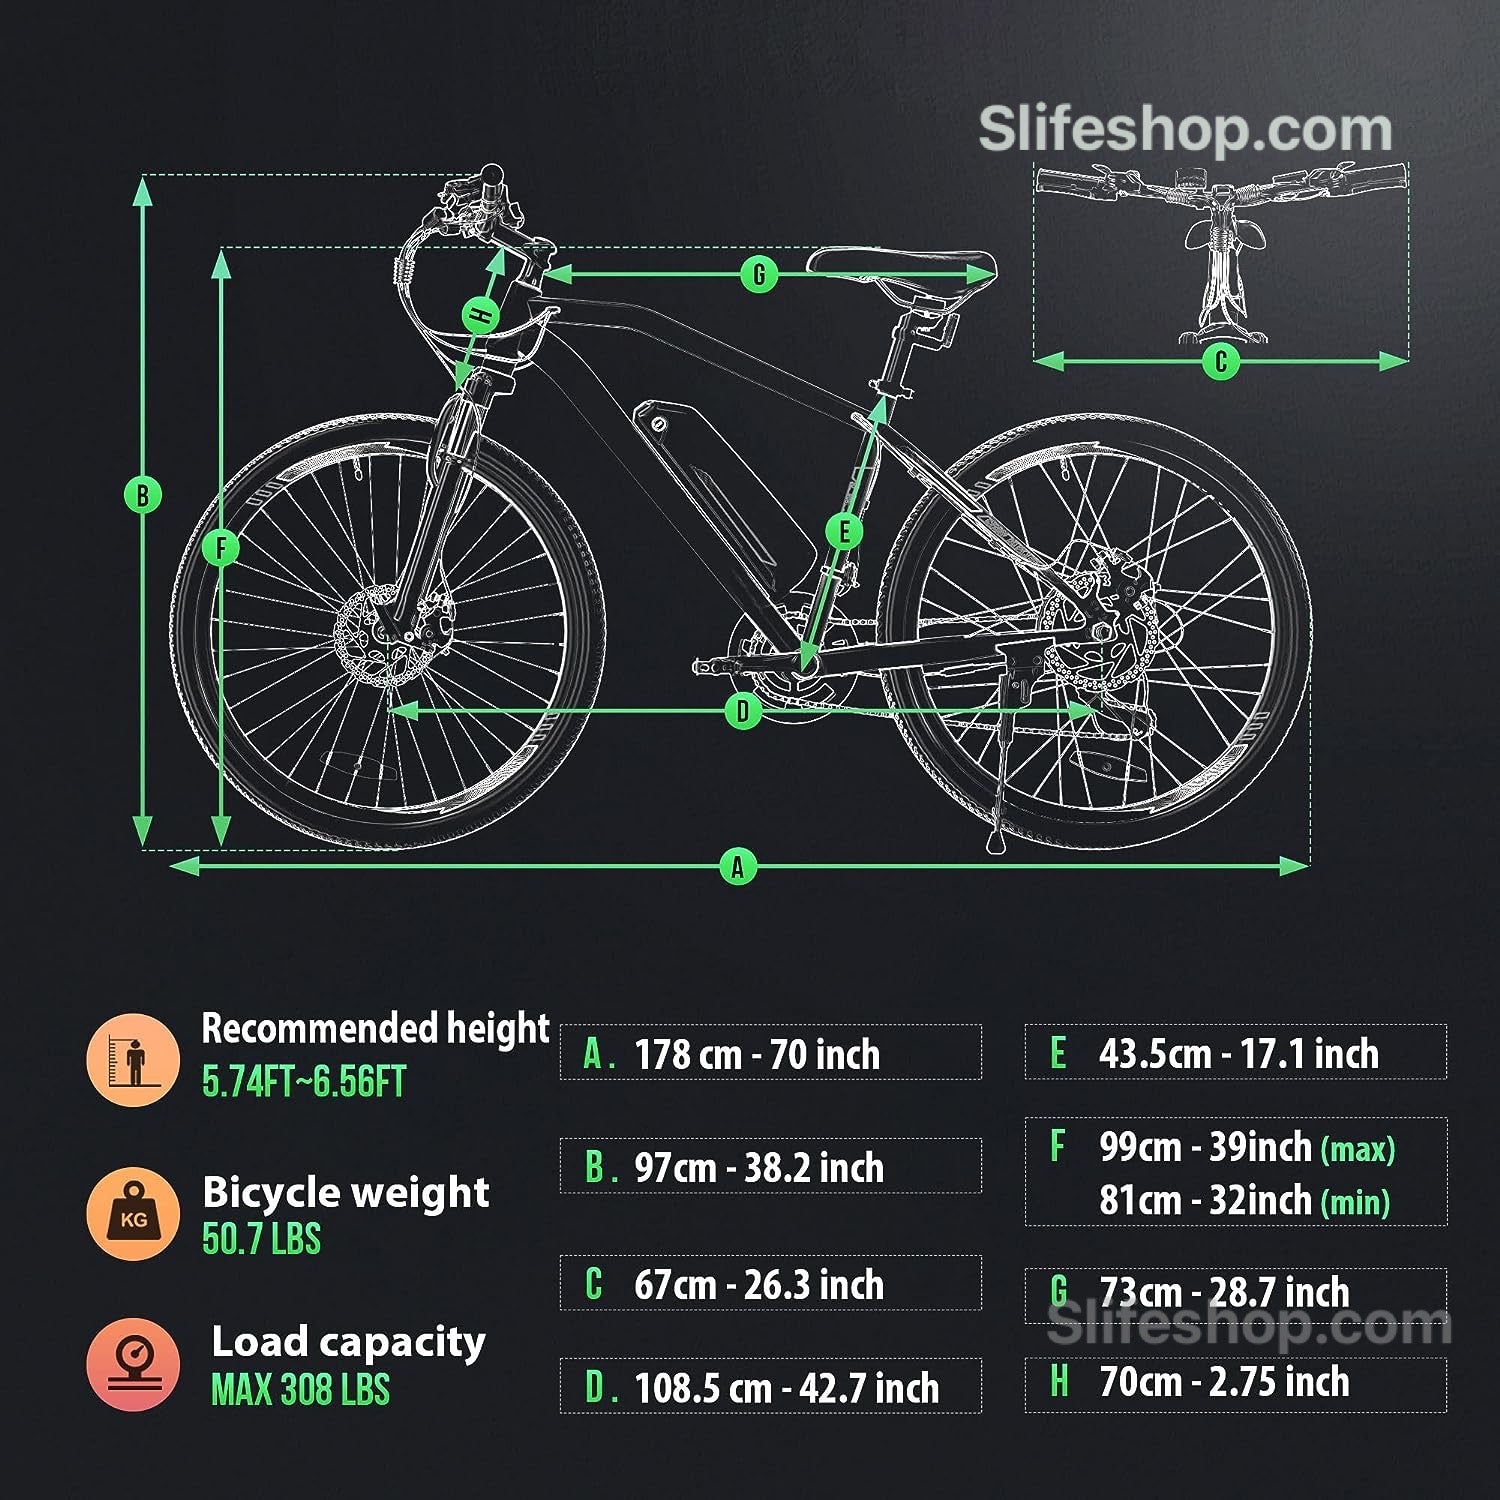 Electric Bike, Cybertrack 300 Electric Bike for Adults, 27.5" Electric Mountain Bike, 500W BAFANG Motor, Removable Battery, 48V 10.4Ah Battery, Suspension Fork, Shimano 21 Speed Gears